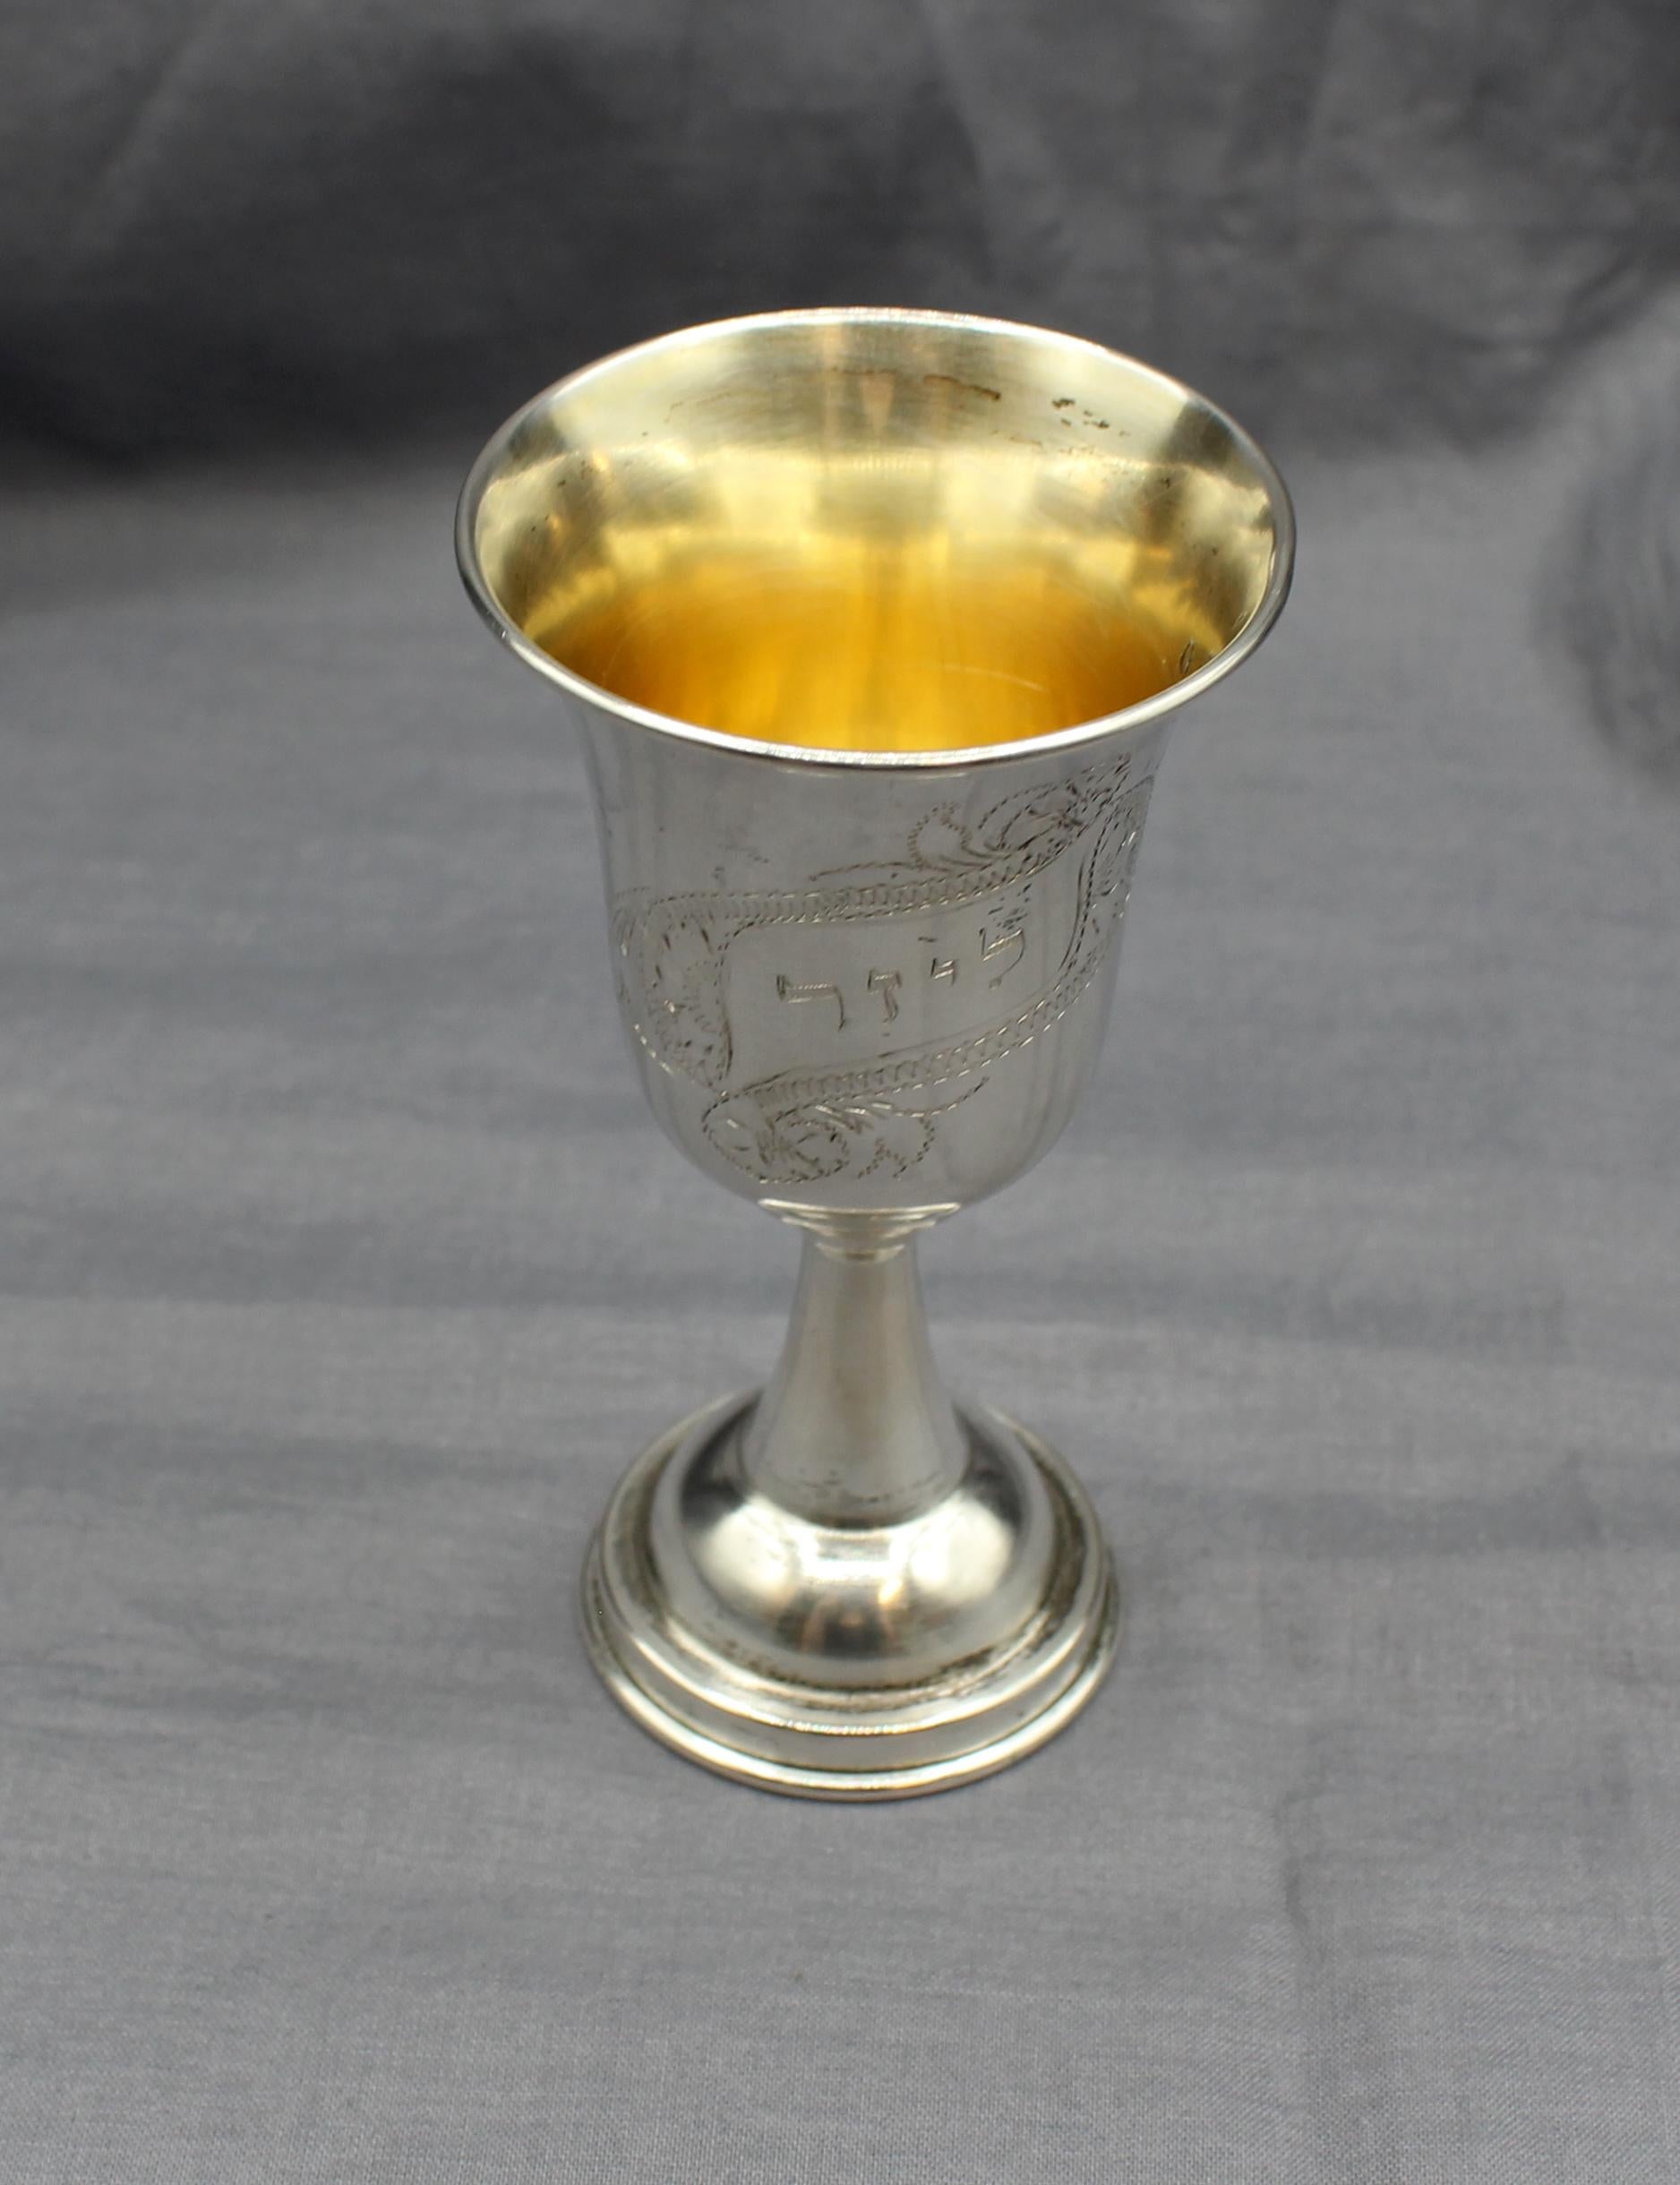 Antique silver Kiddush cup, Continental. Rolled rim & gilded interior. Hebrew engraving. Marked 84P with other indistinct marks. 1.15 troy oz. 4 5/16